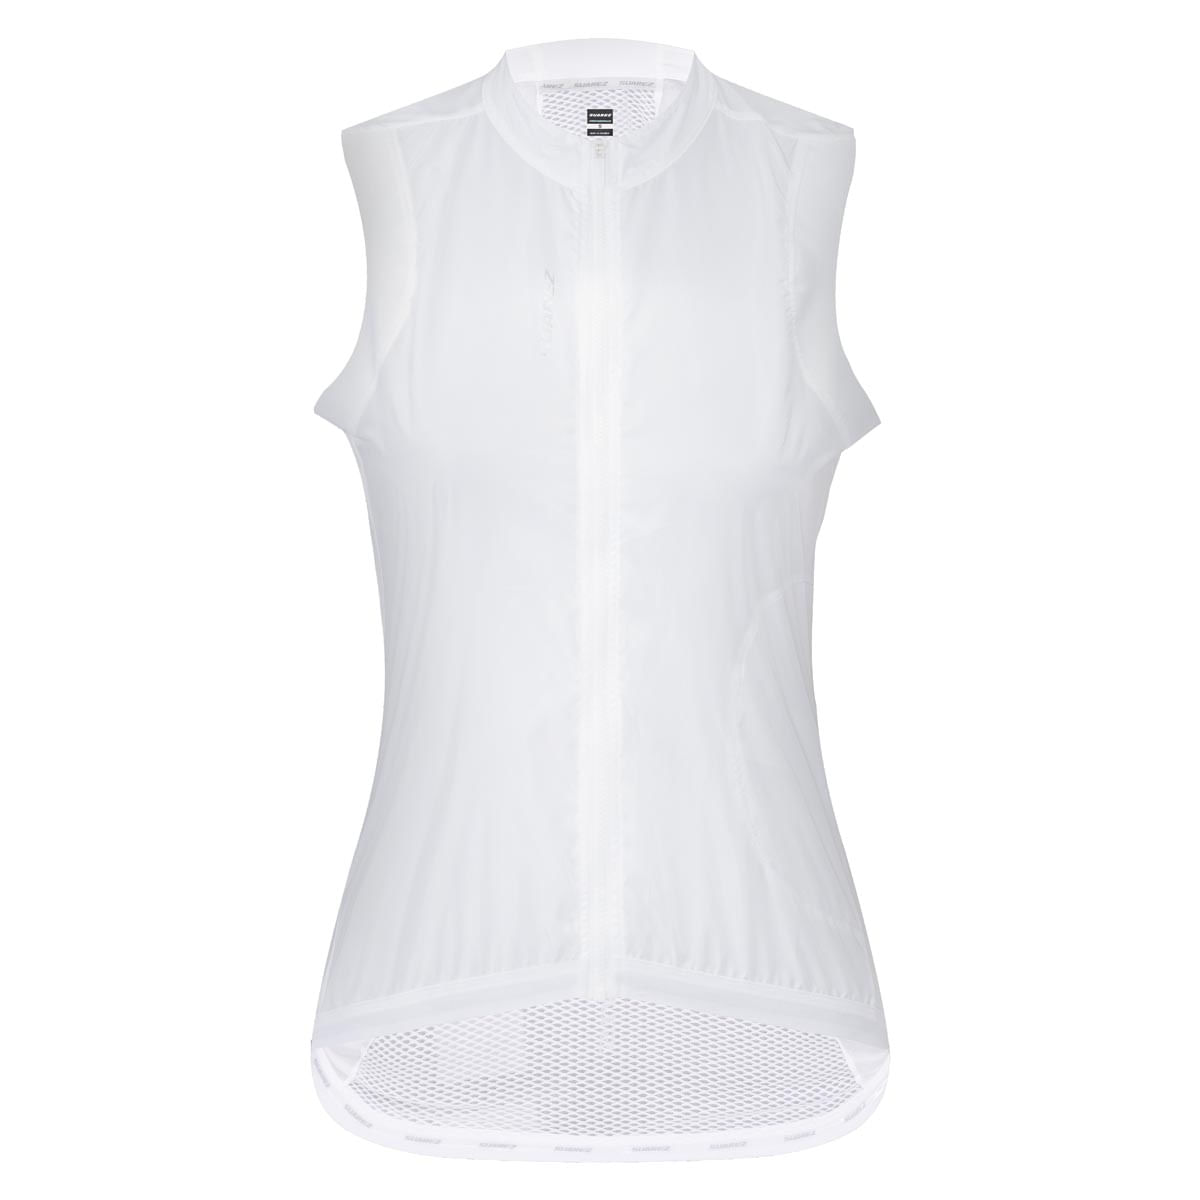 Chaleco ciclismo - Force White - Torralba Sports